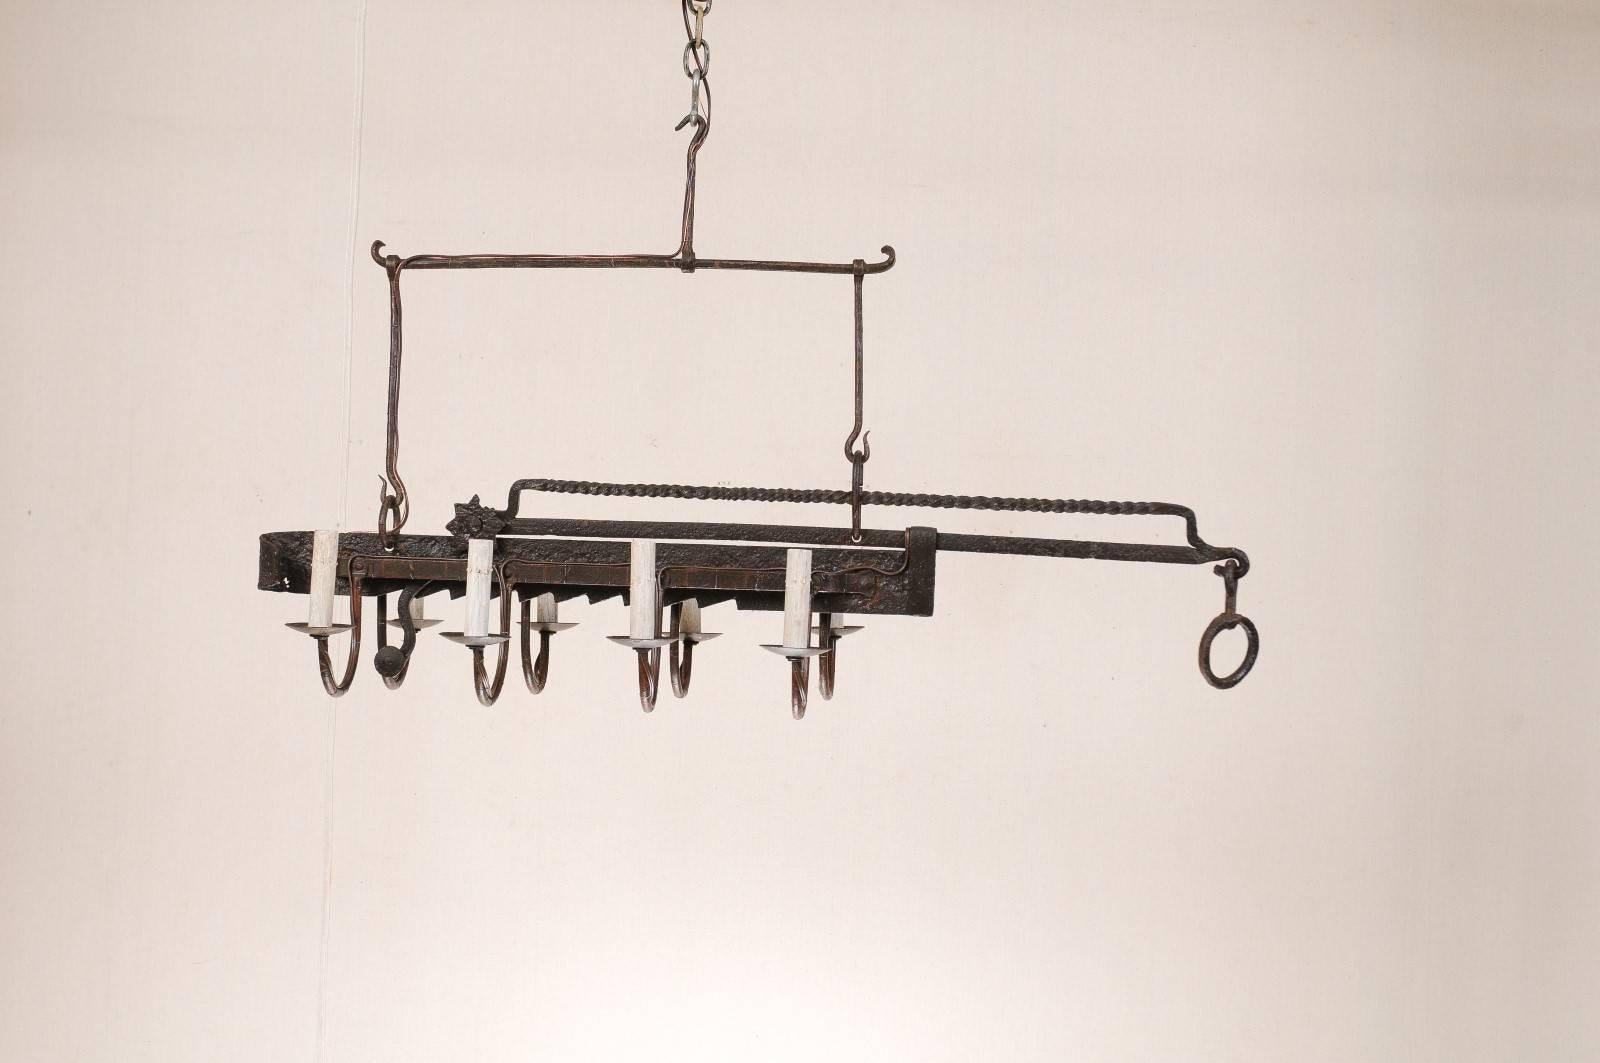 A French Mid-Century, eight-light forged-iron chandelier made from a 19th century spit-jack. A spit-jack is a type of rotisserie that was once common in fireplaces. This chandelier has eight swooping arms which connect to the central spit-jack. This